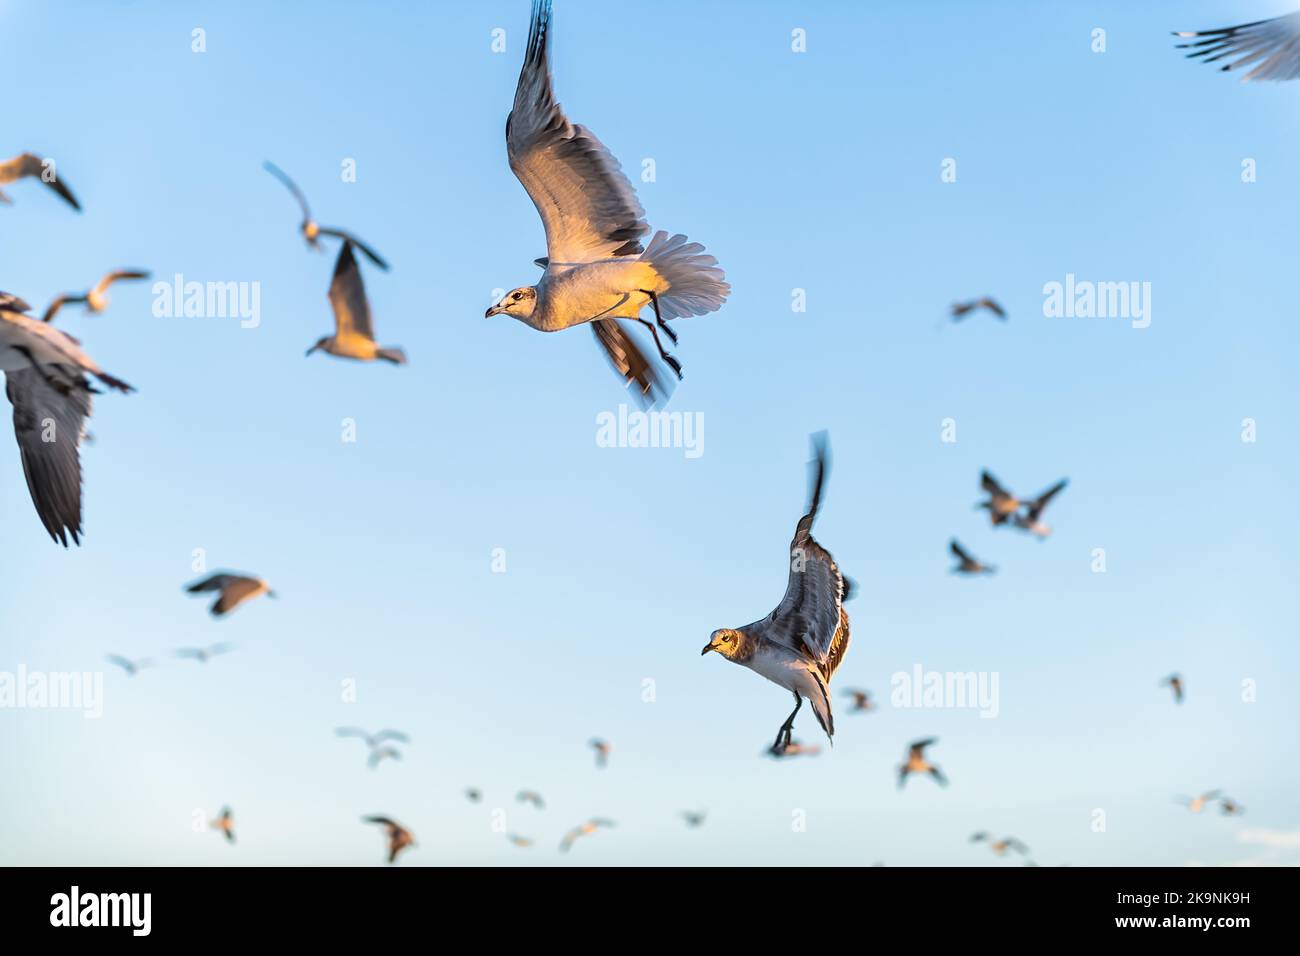 Closeup flock of seagulls birds fighting flying at Myrtle Beach, South Carolina city by Atlantic ocean water swarming in flight in blue sky Stock Photo